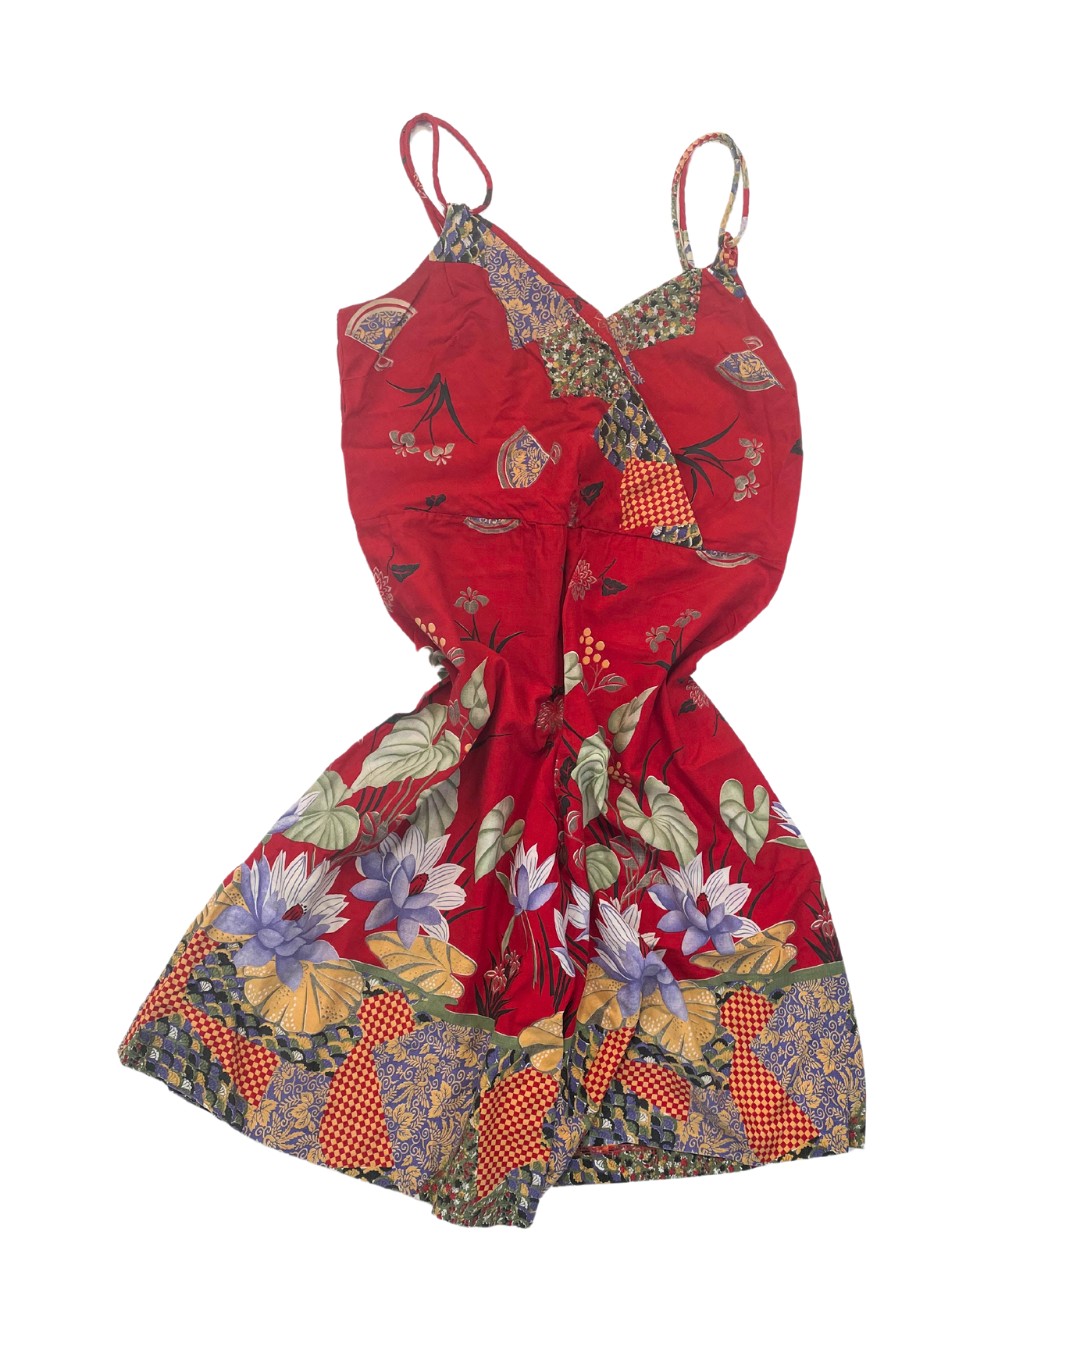 Red Floral Playsuit